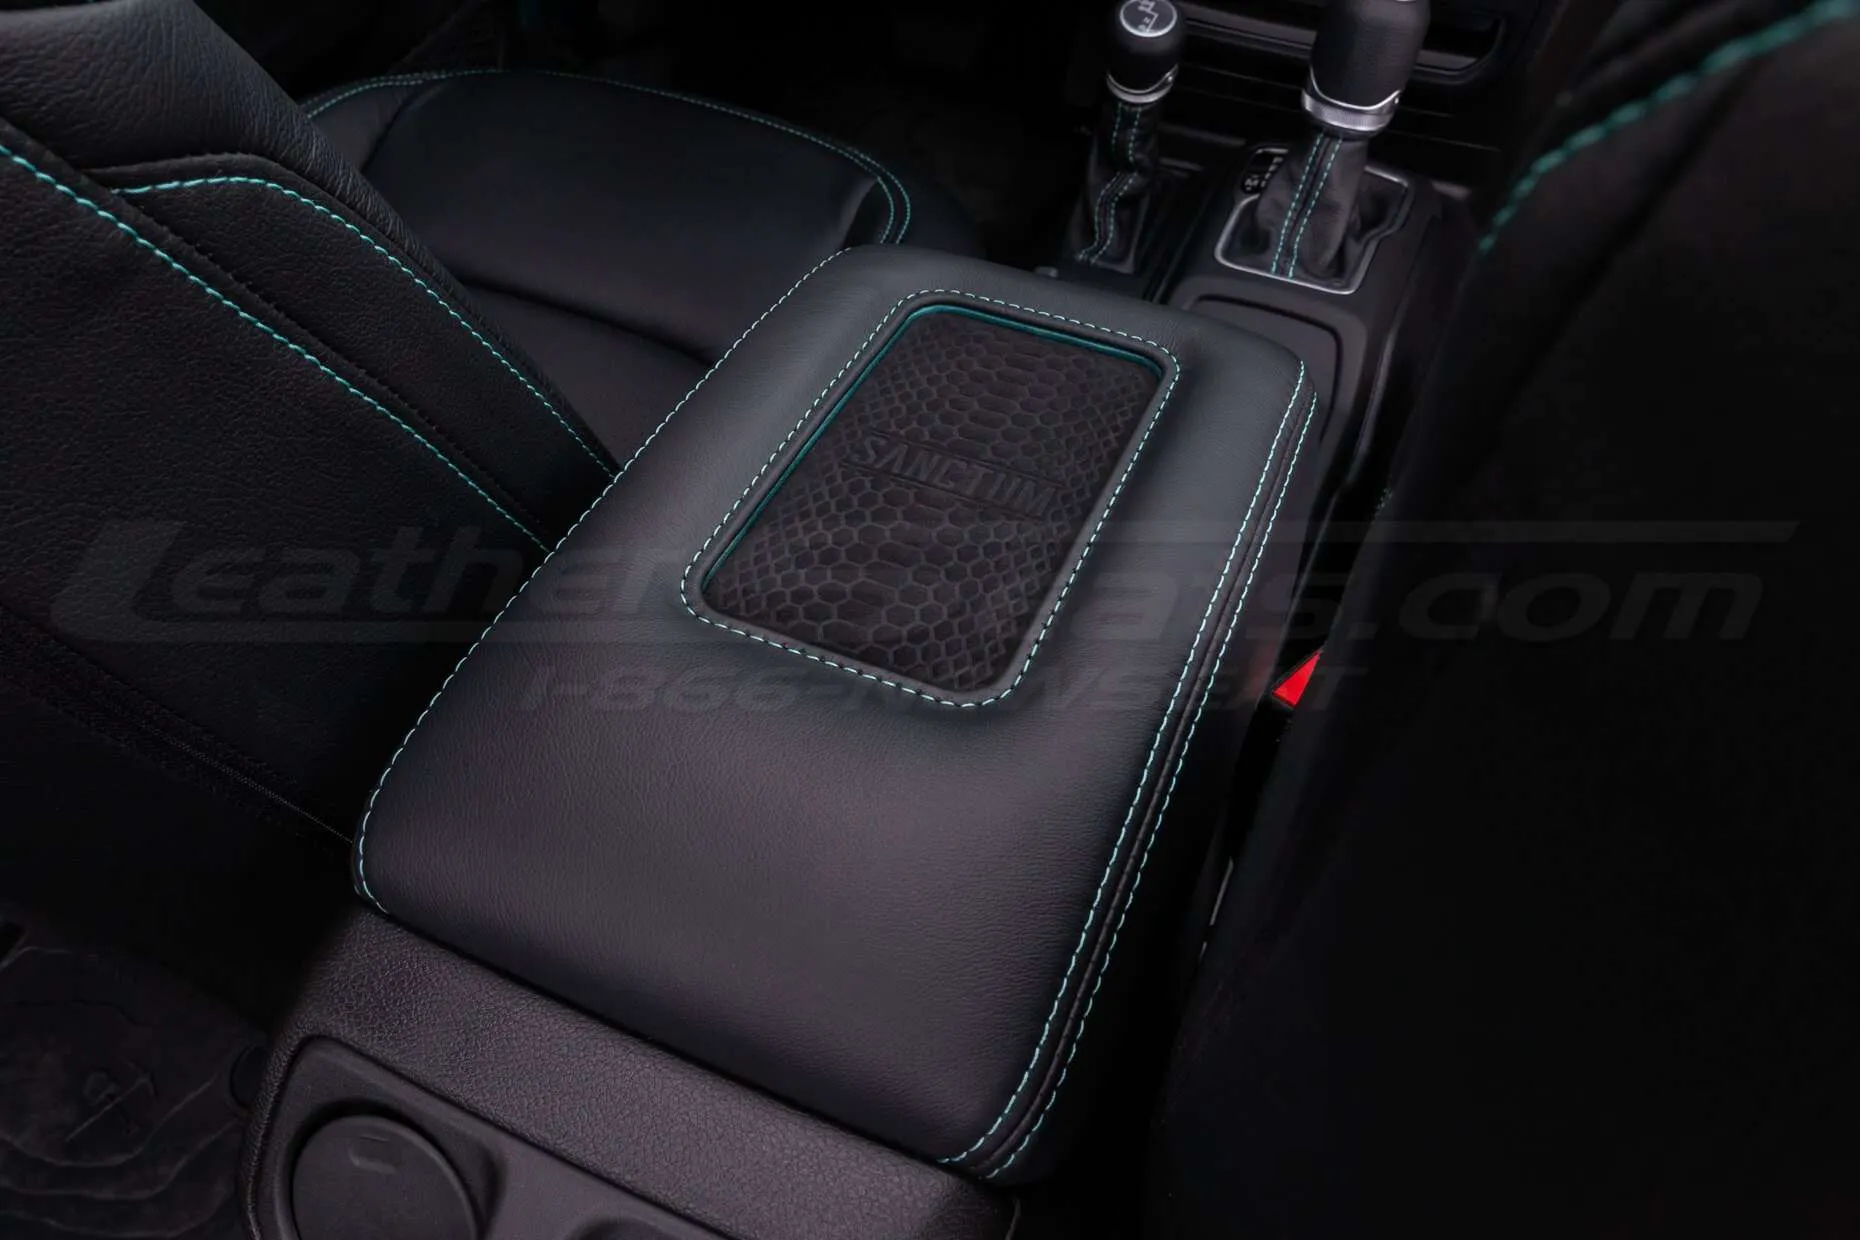 Jeep Wrangler JL Upholstery Kit - Black - Installed - Sanctum wireless charging console close-up